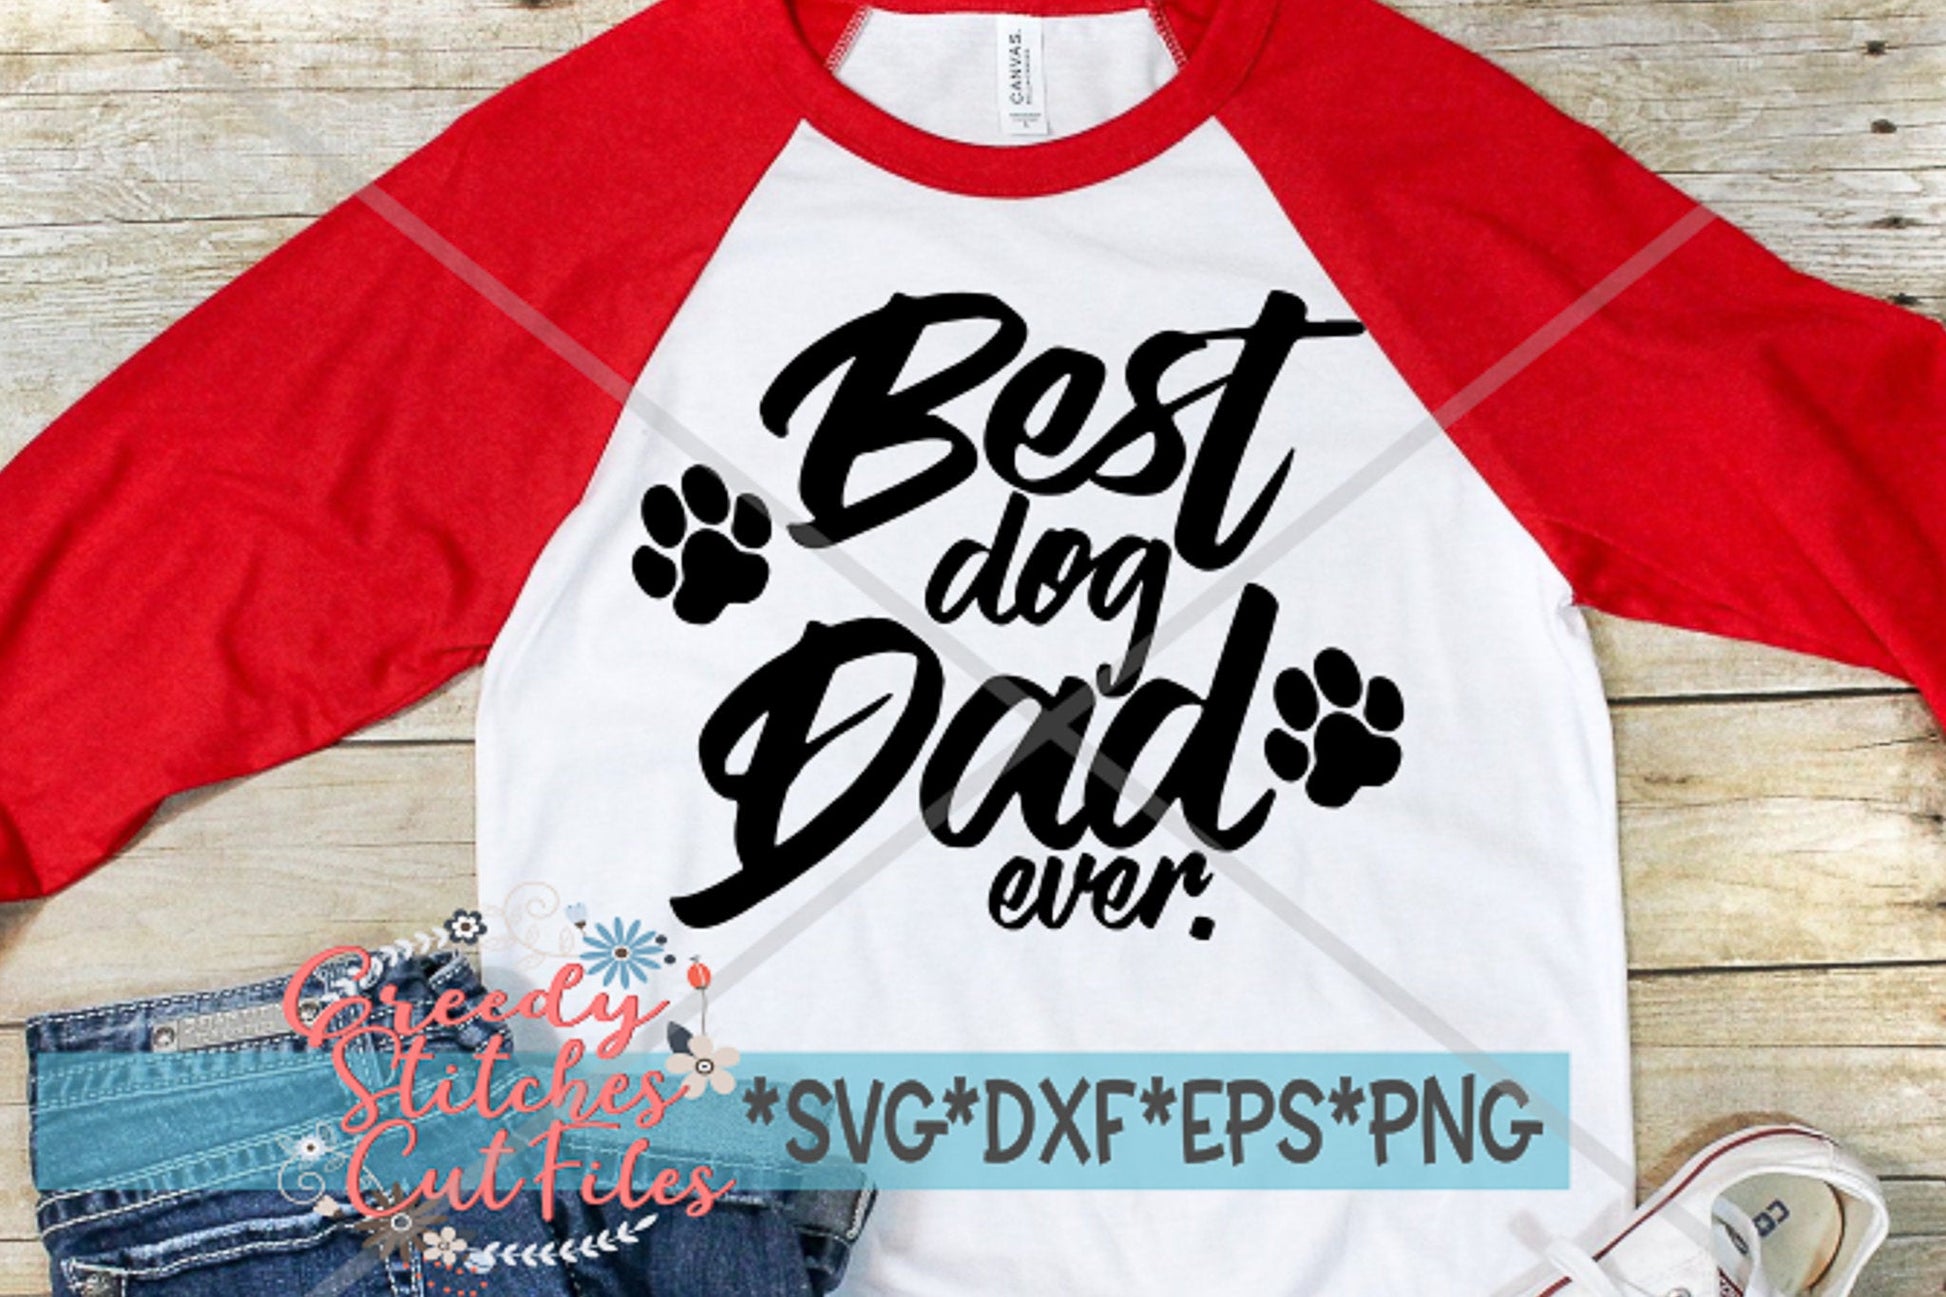 Father&#39;s Day SVG | Best Dog Dad Ever SvG | Father&#39;s Day svg, dxf, eps, png. Father&#39;s Day SVG | Dog Dad SVG | Instant Download Cut File.